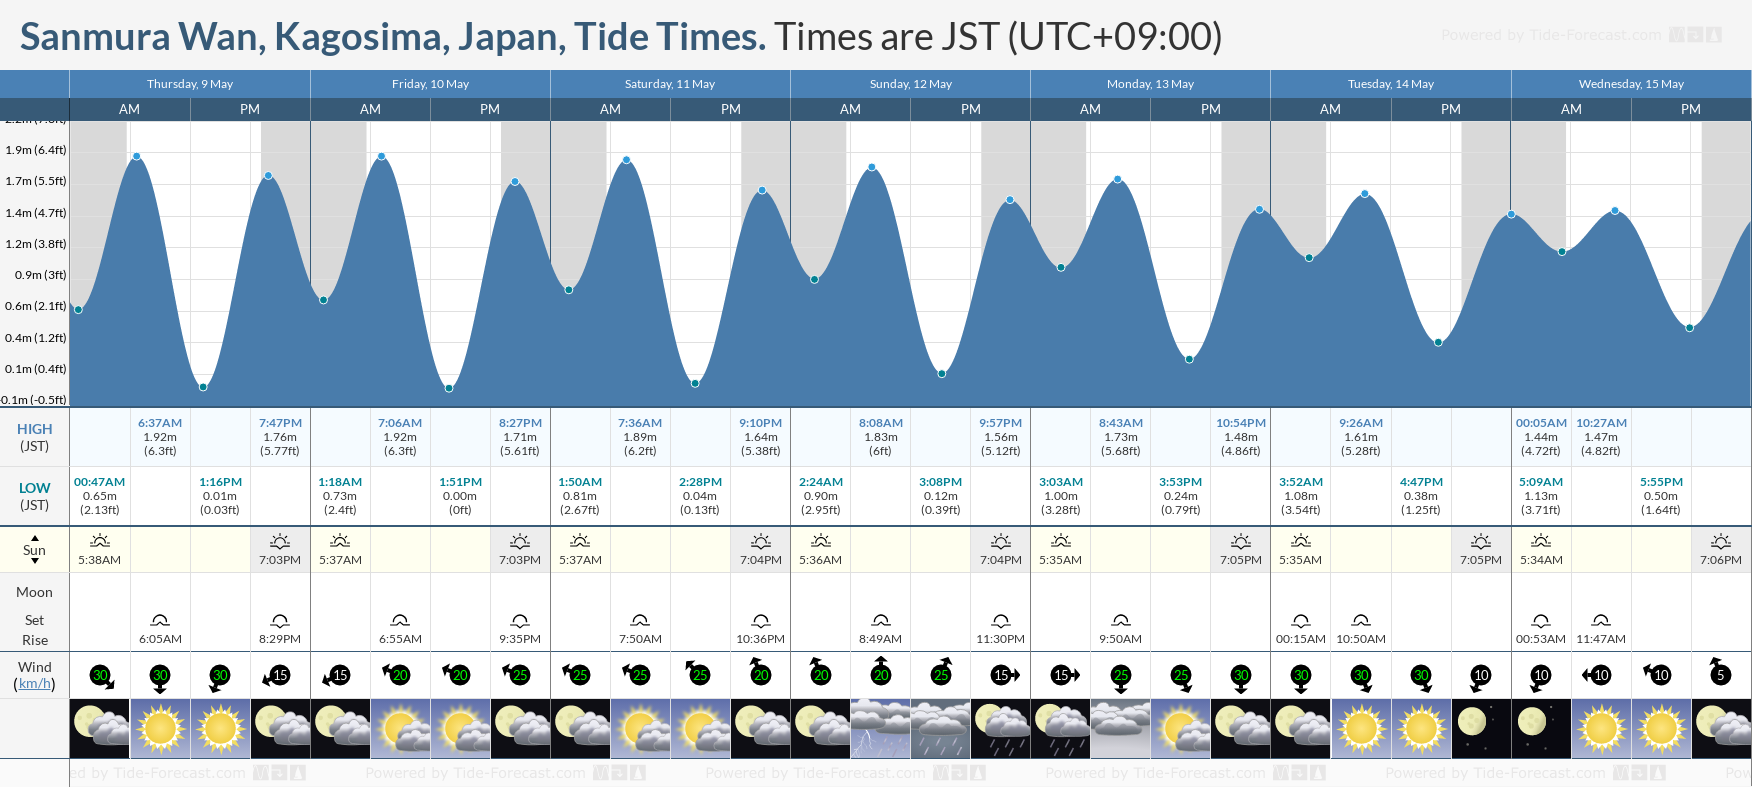 Sanmura Wan, Kagosima, Japan Tide Chart including high and low tide tide times for the next 7 days